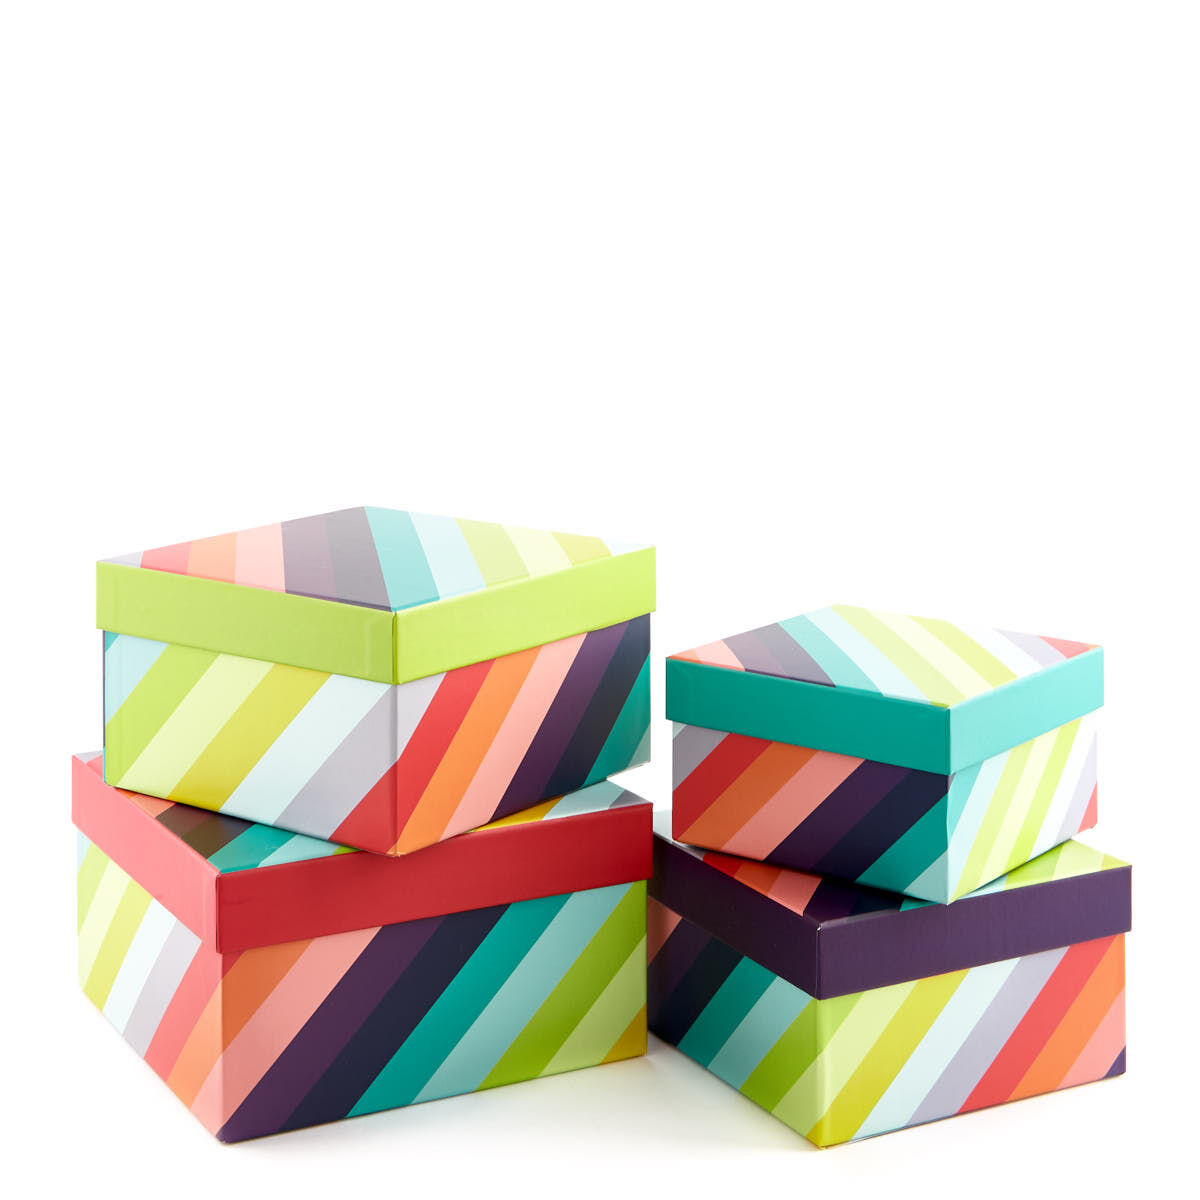 Buy Blue Striped Gift Boxes - Set Of 3 for GBP 6.07 | Card Factory UK